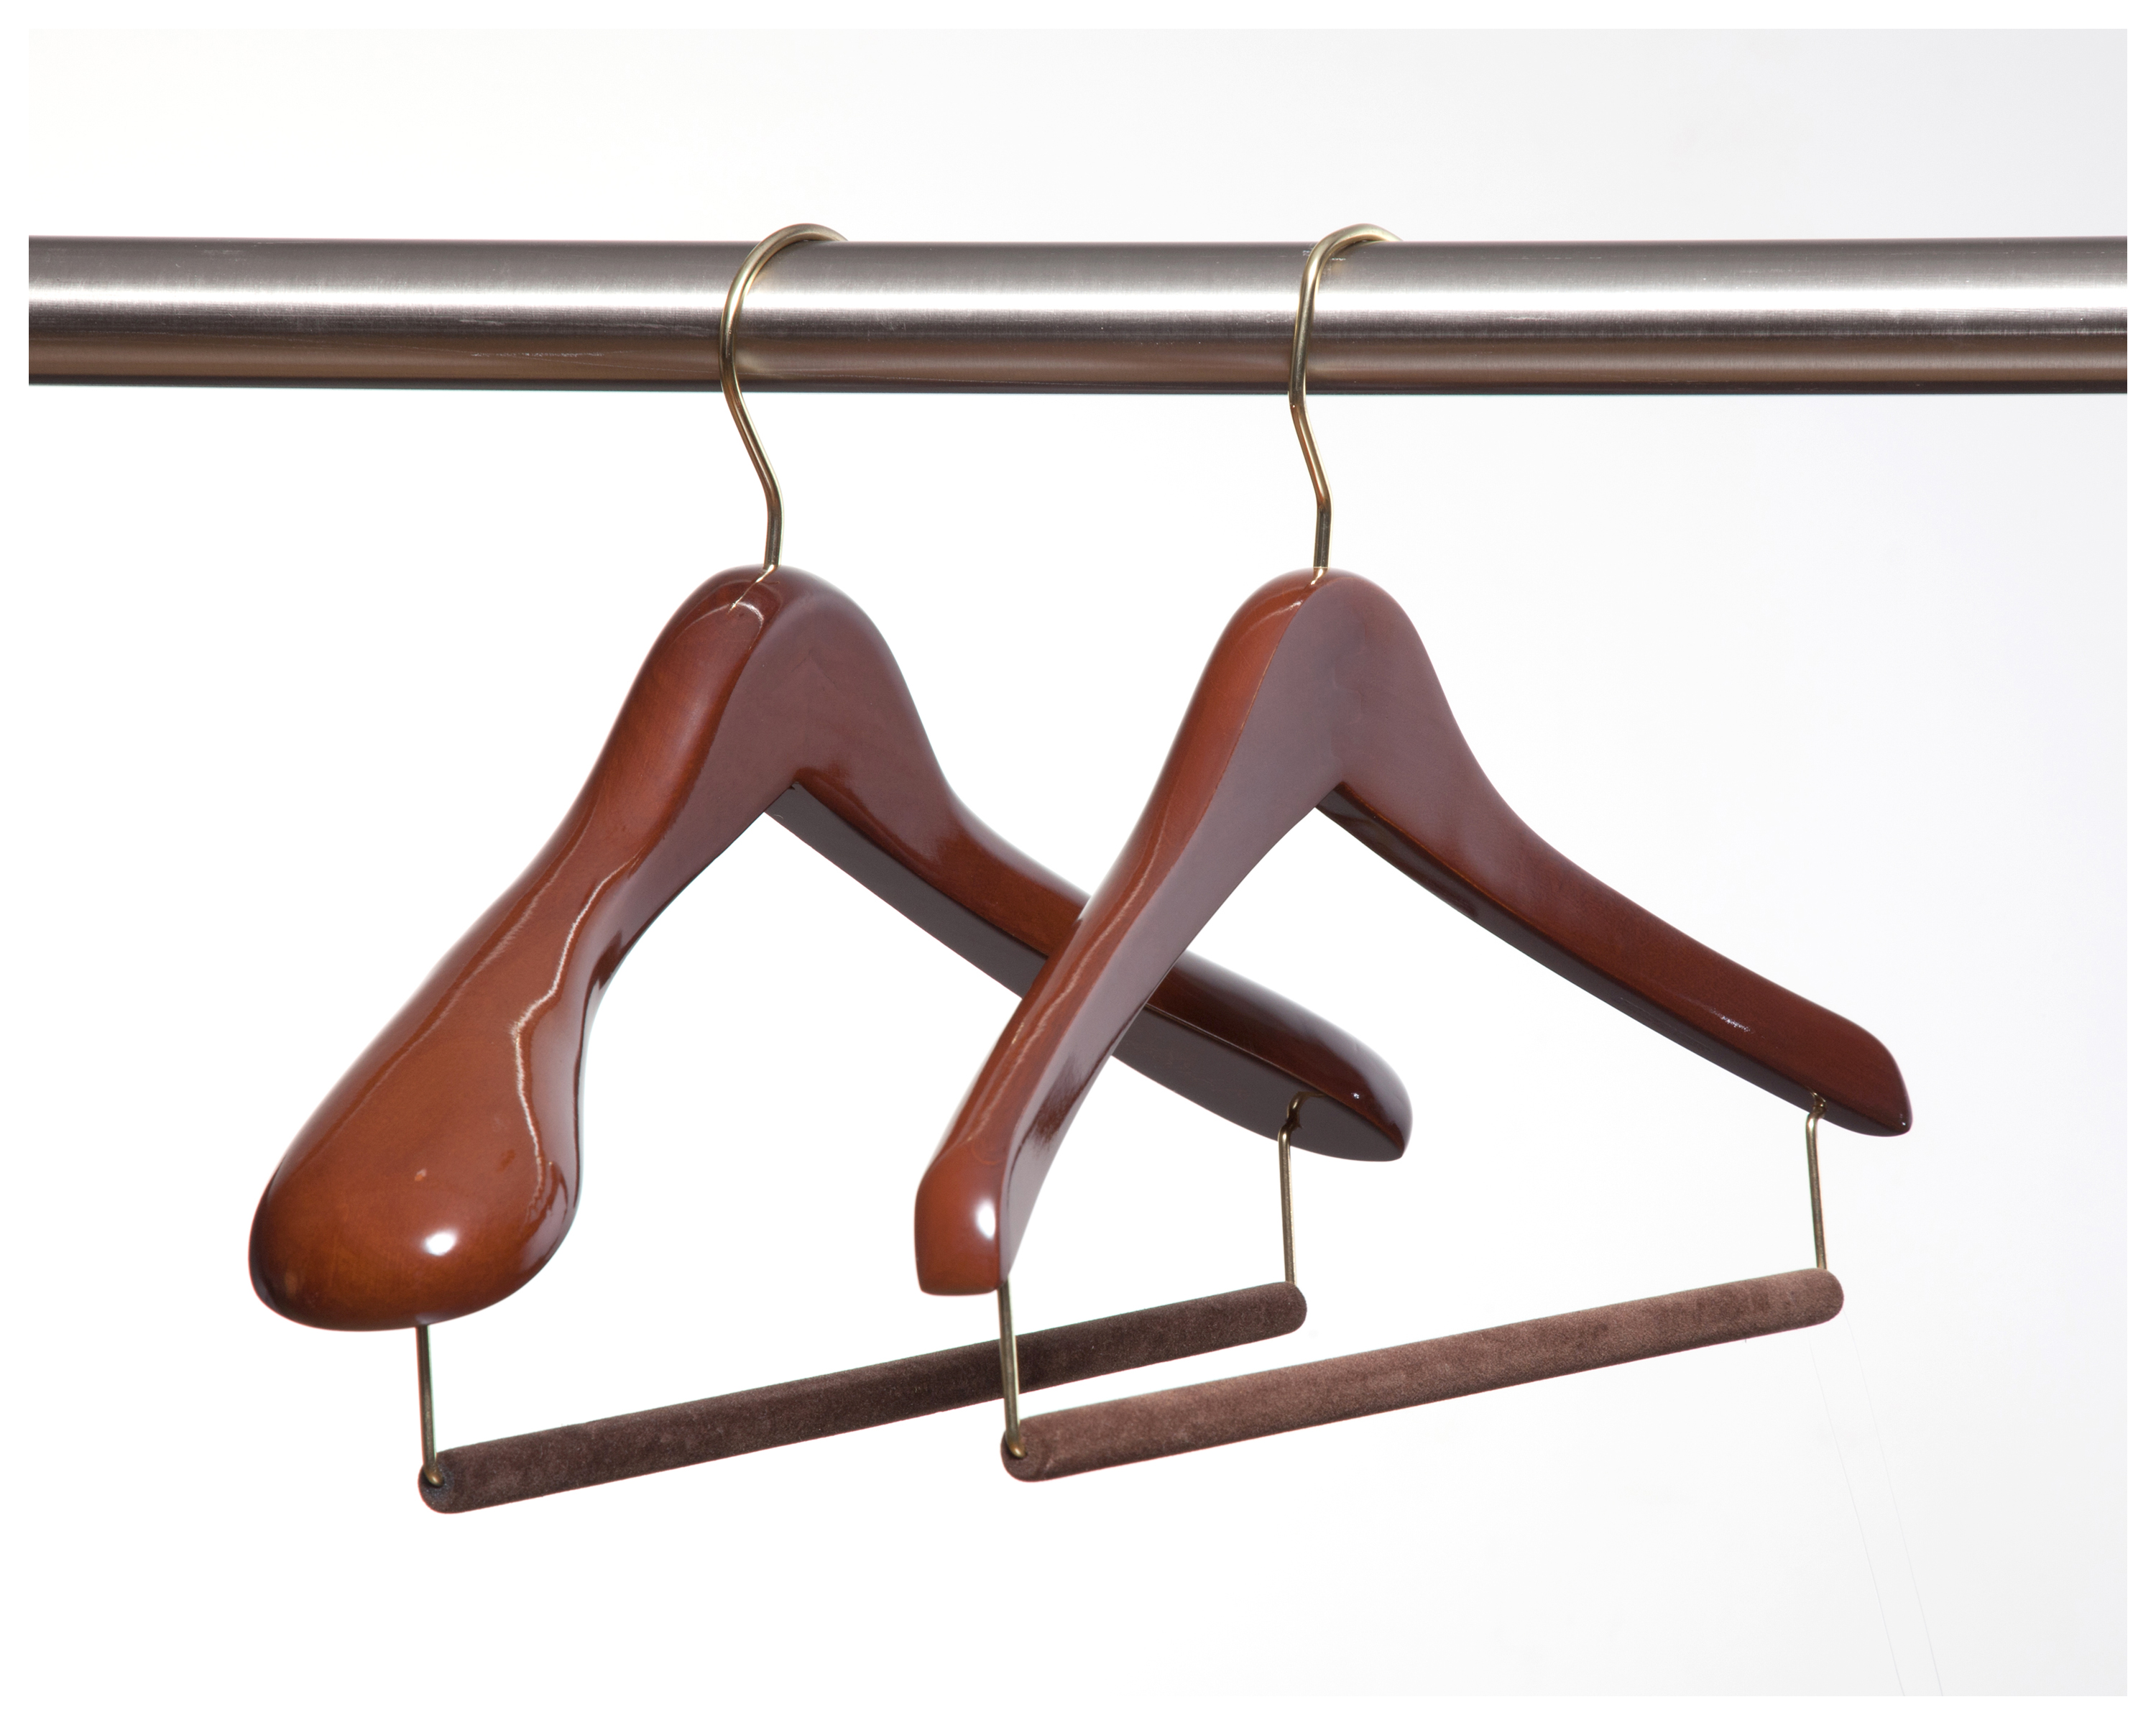 This is a photograph of our Luxury Suit Hanger (left) and Luxury Travel Hanger (right). These two hangers offer unprecedented levels of support, come with Felted Trouser Bars that will not crease trousers, and are available in an unprecedented FOUR widths for a tailored fit.